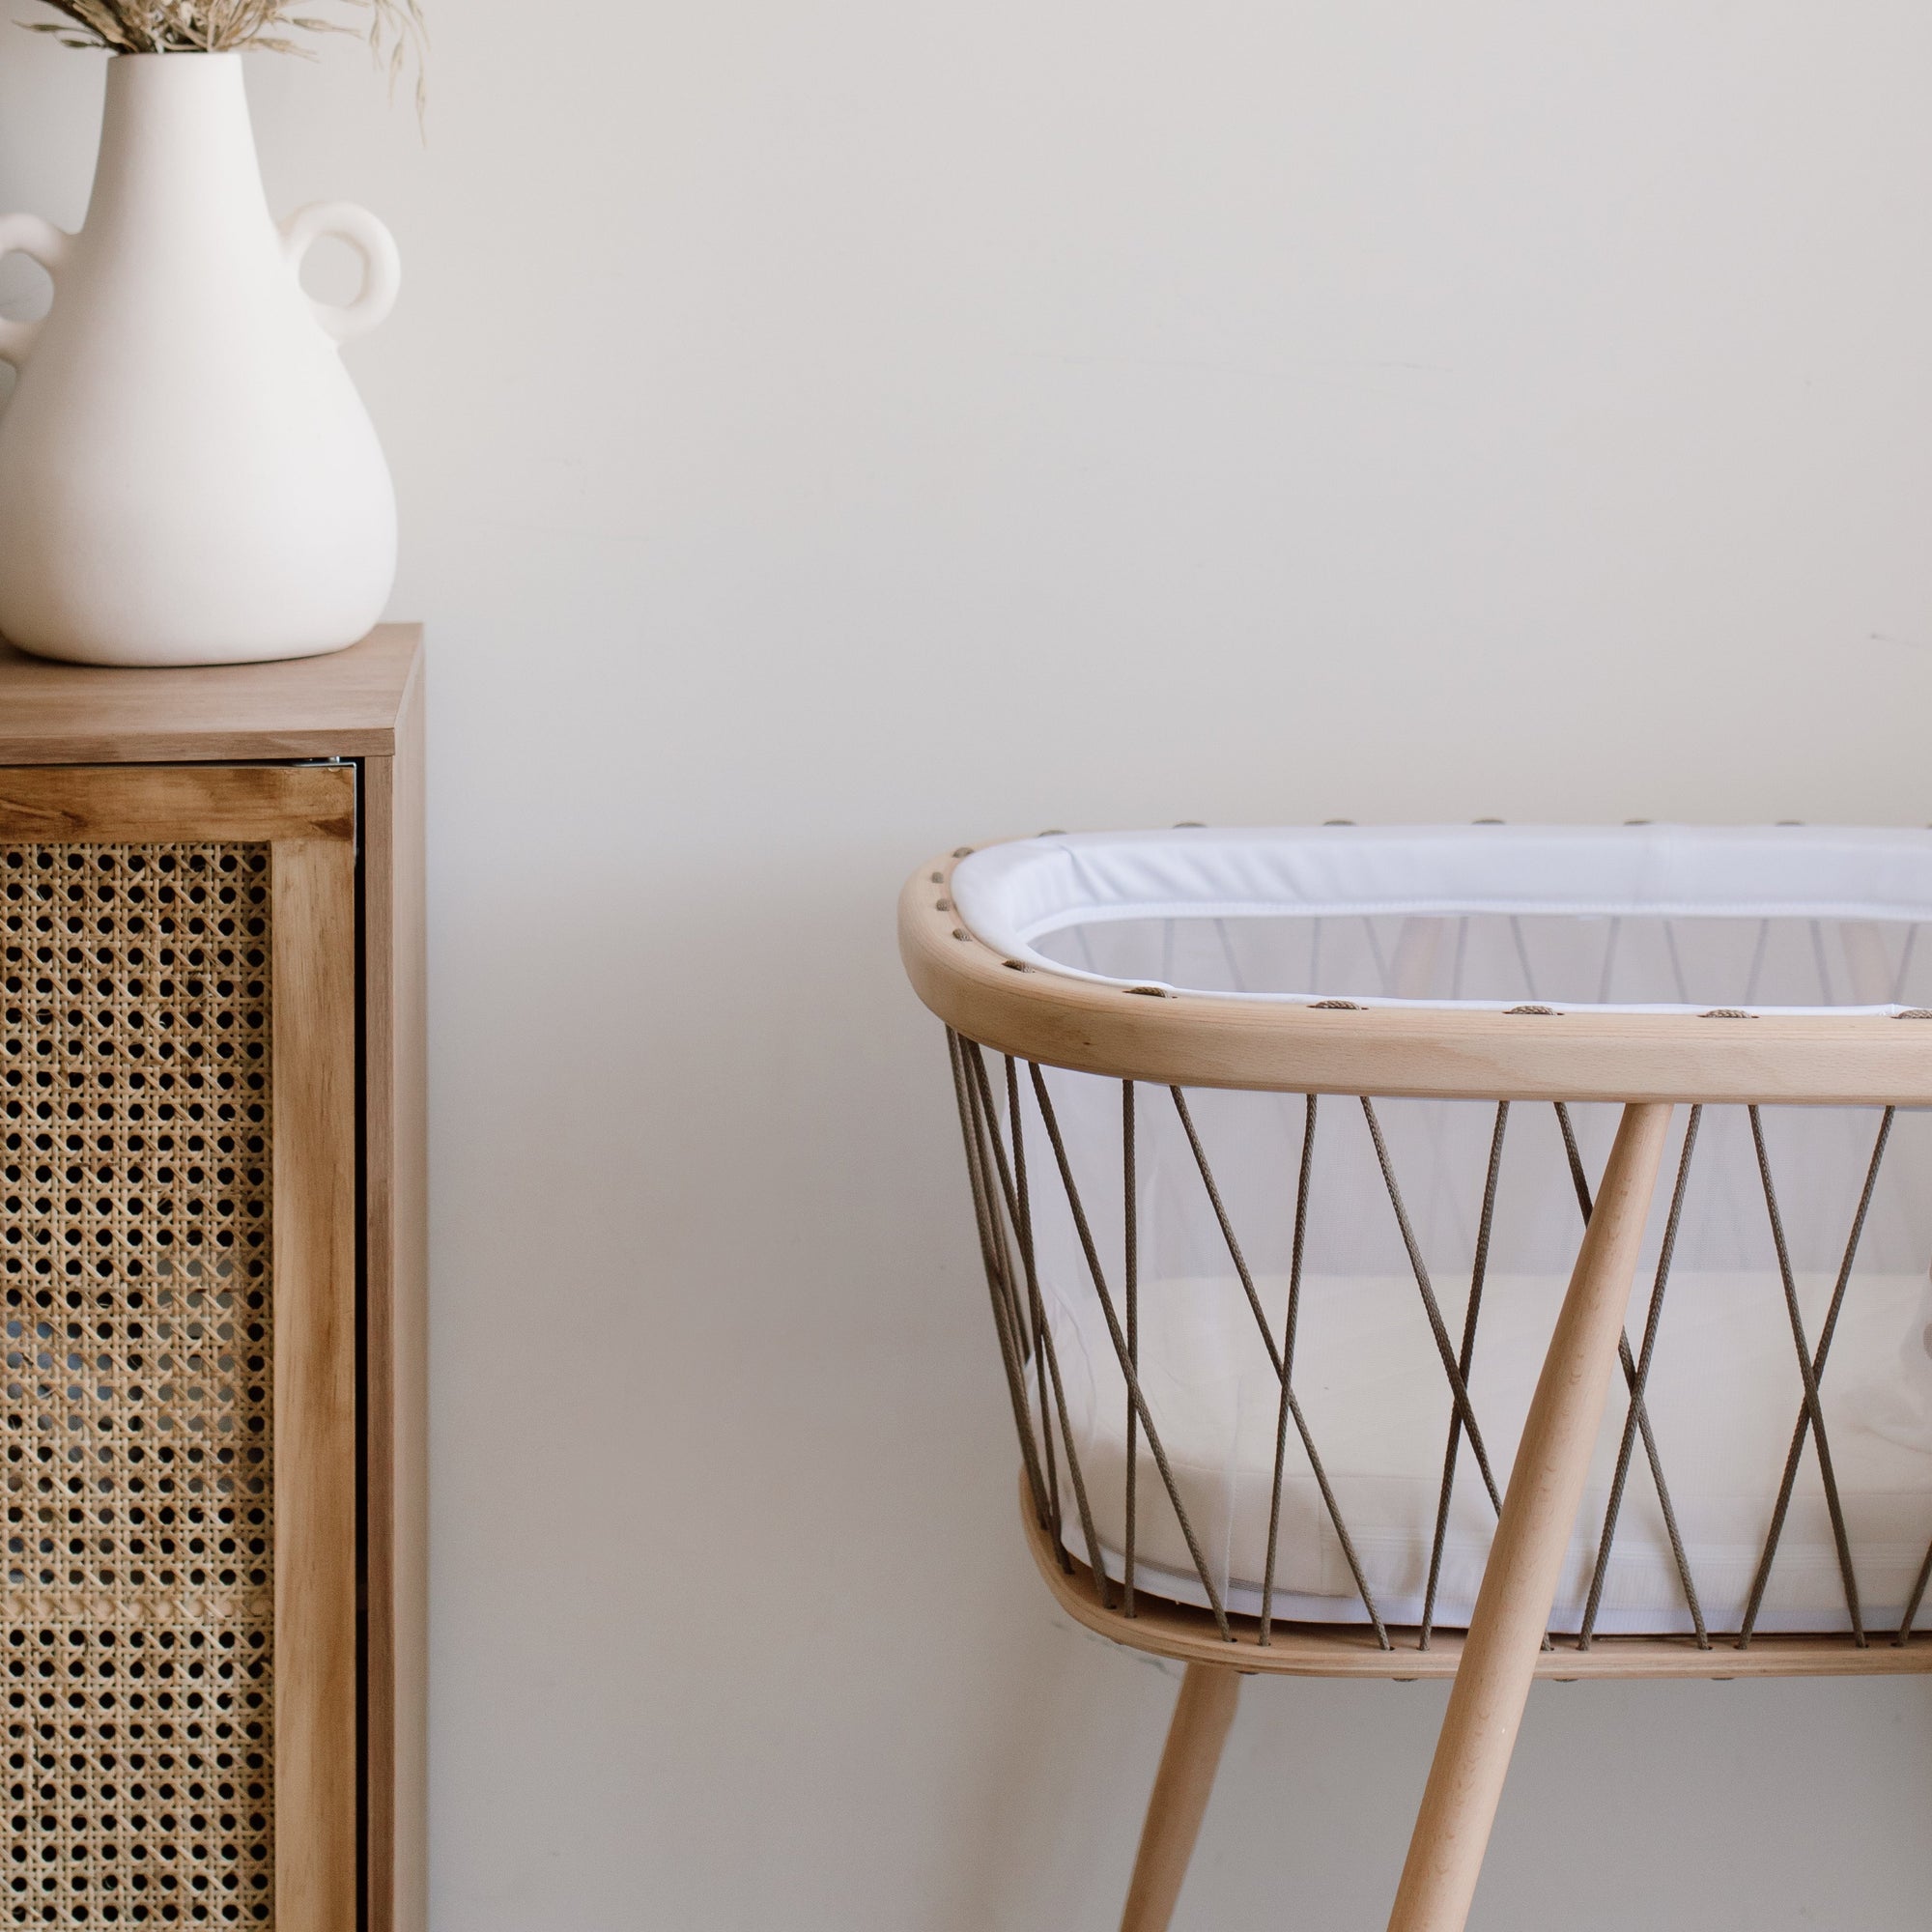 A KUMI bassinet in hazelnut colour by Charlie Crane adjacent to a wooden chest of drawers.